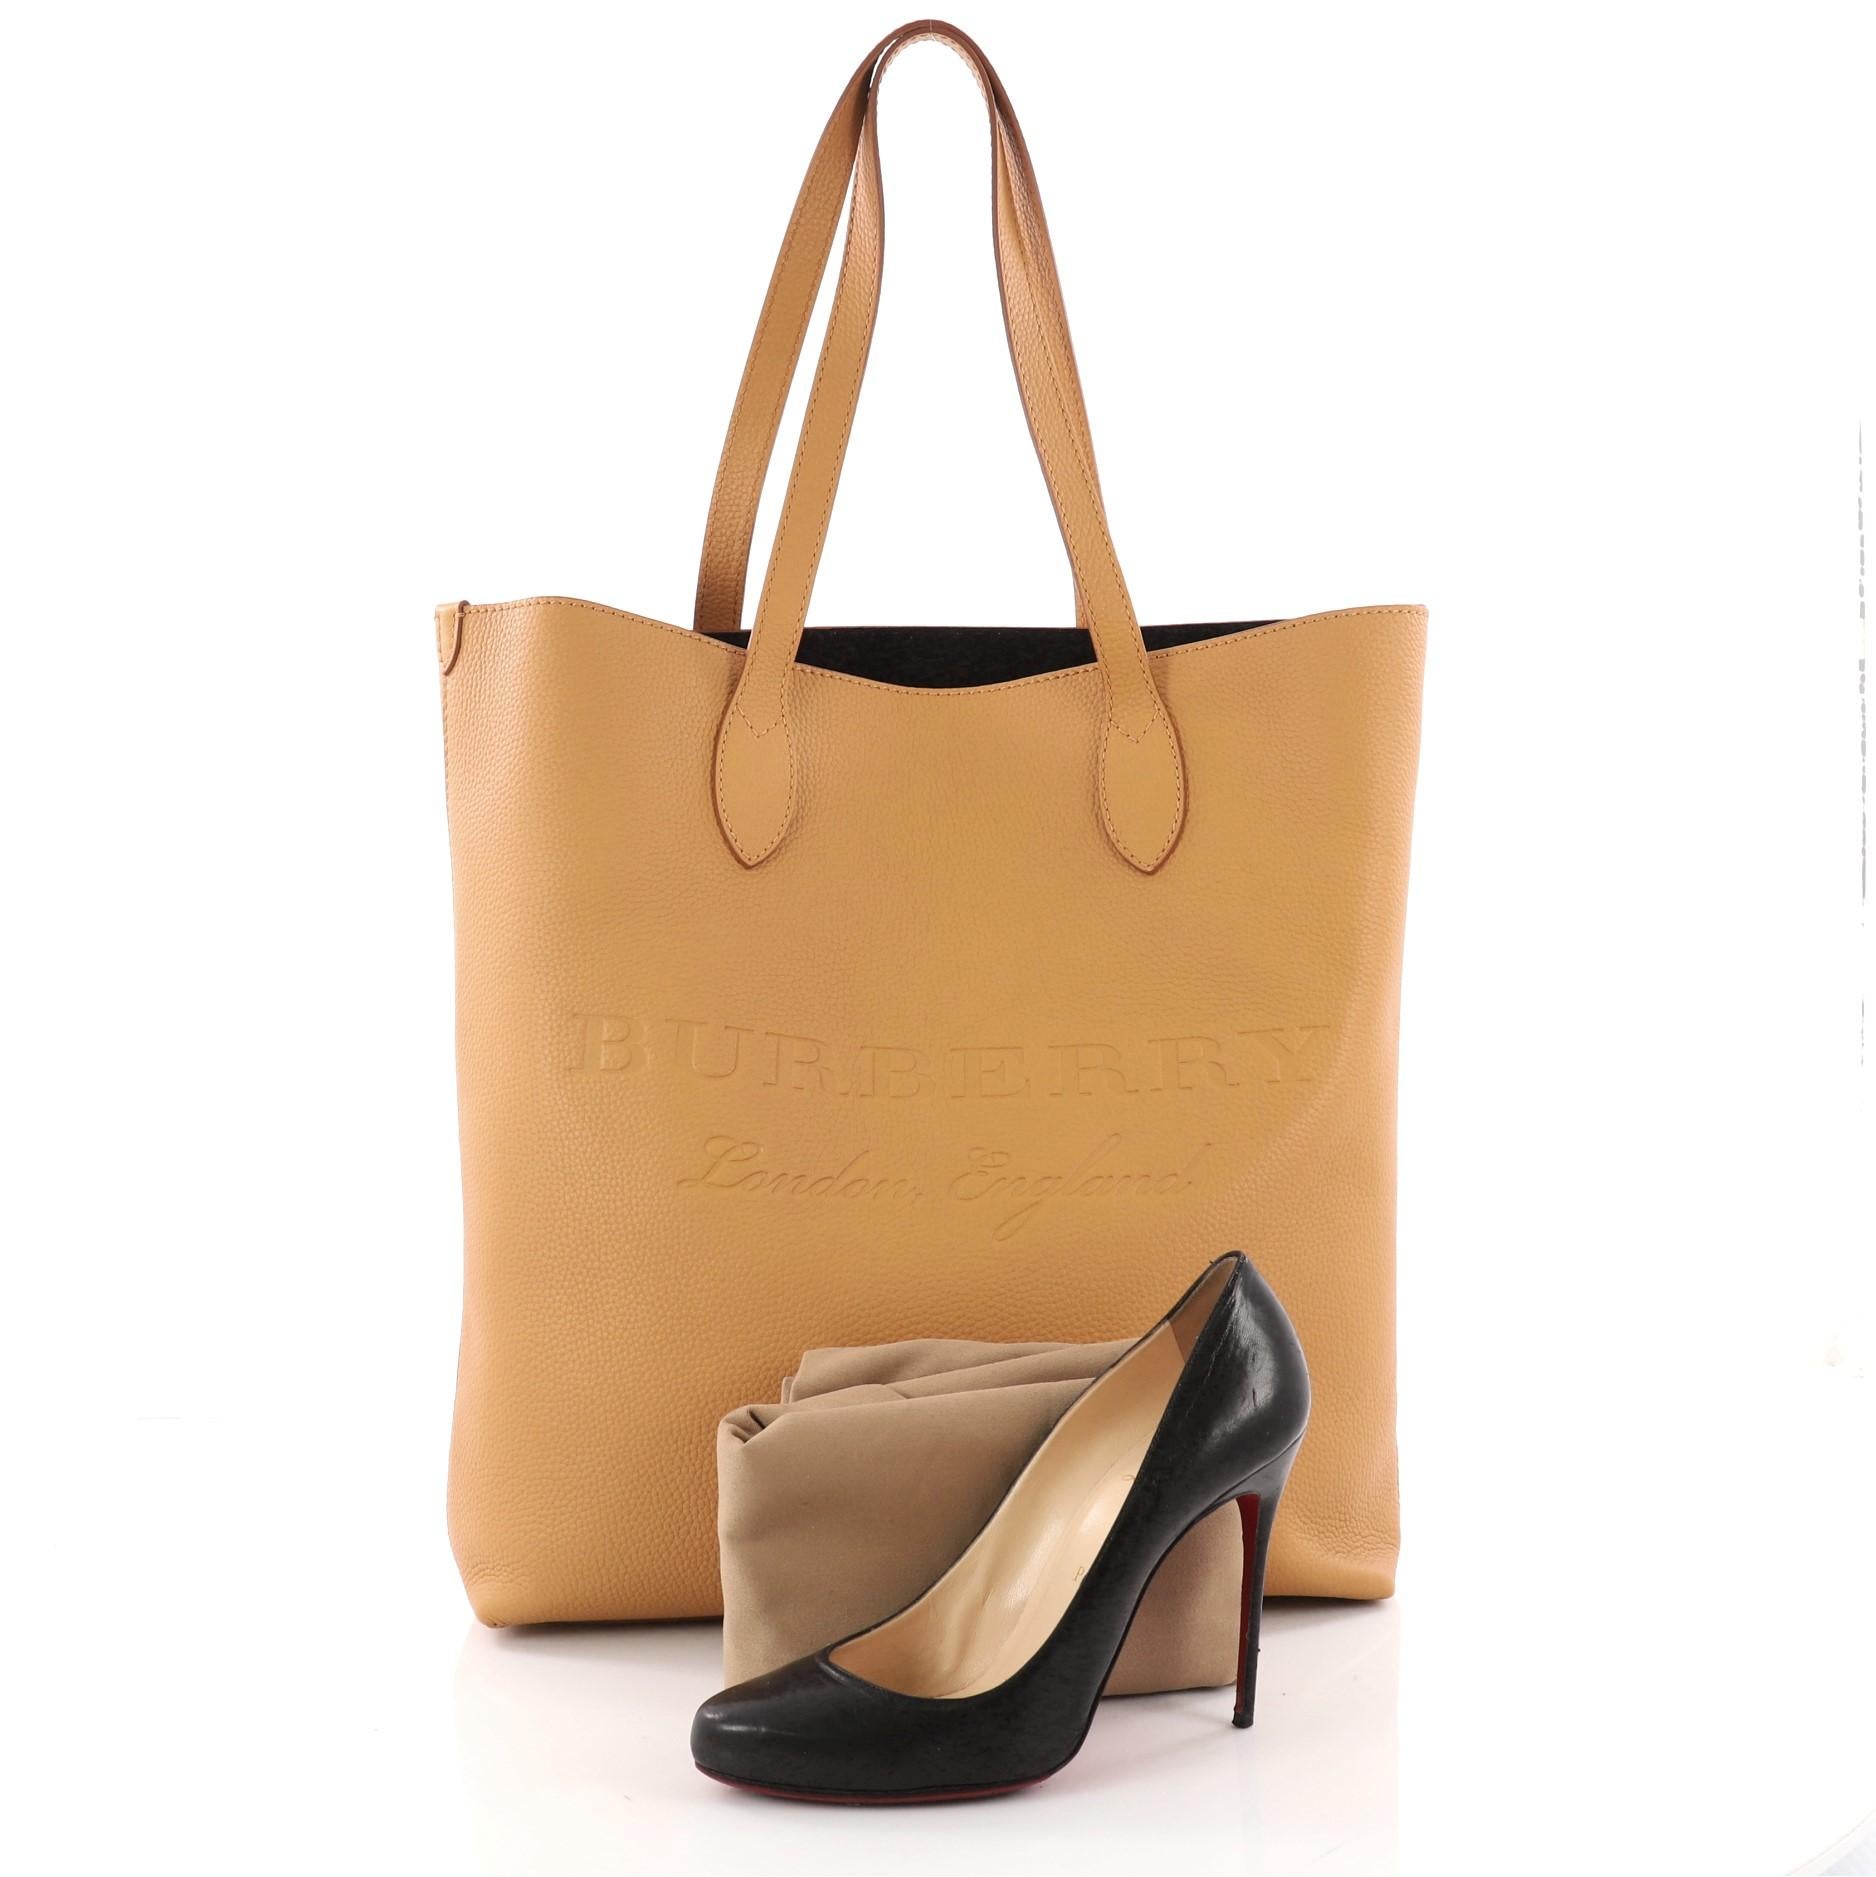 This authentic Burberry Remington Tote Embossed Leather Tall is a minimalist bag perfect for your daily excursions. Crafted in mustard leather, this chic bag features dual-flat leather handles, embossed logo at center front, and gold-tone hardware